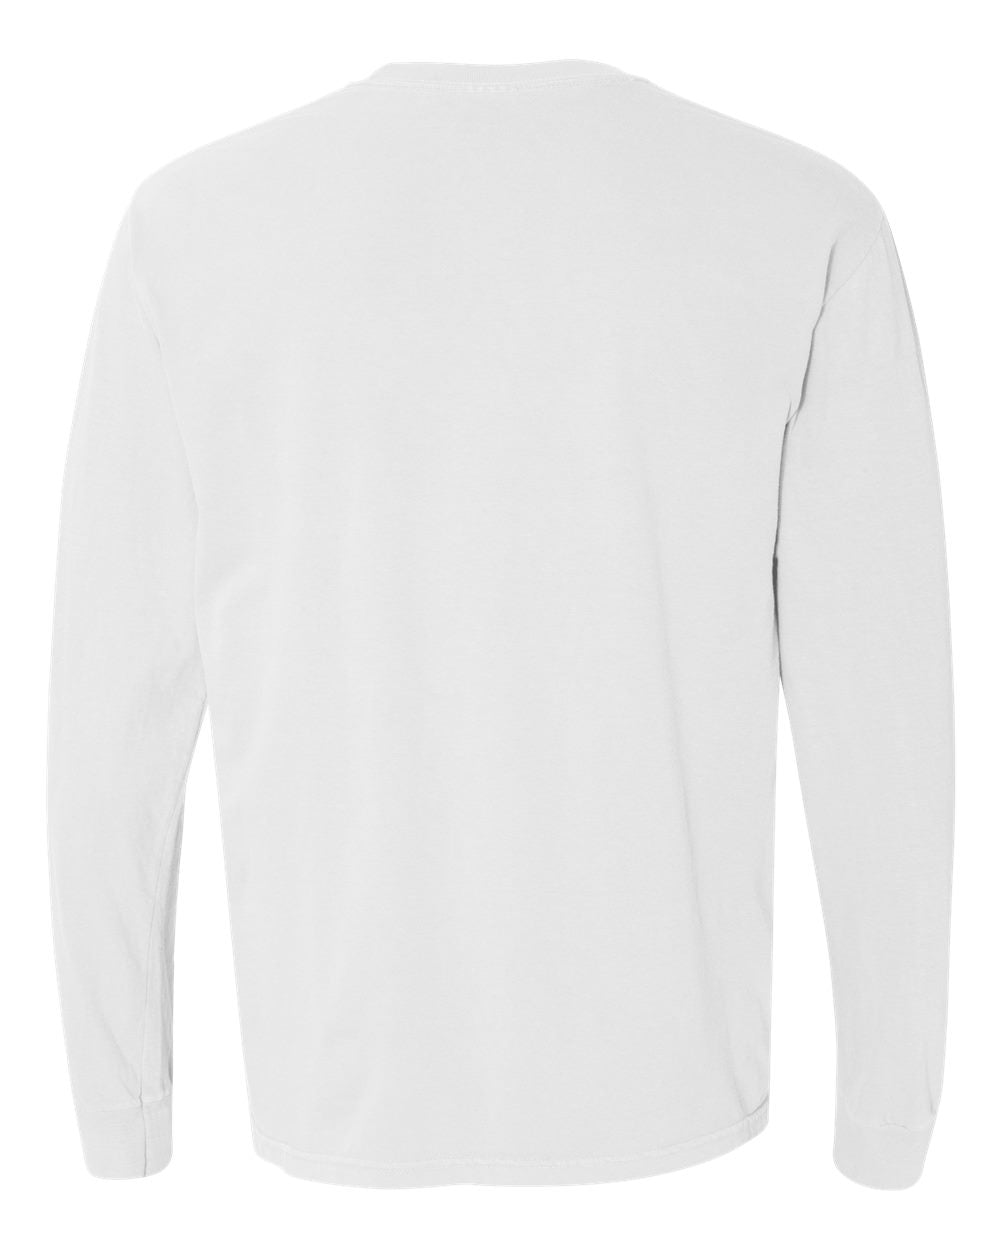 Comfort Colors Garment-Dyed Heavyweight Long Sleeve T-Shirt 6014 #color_White